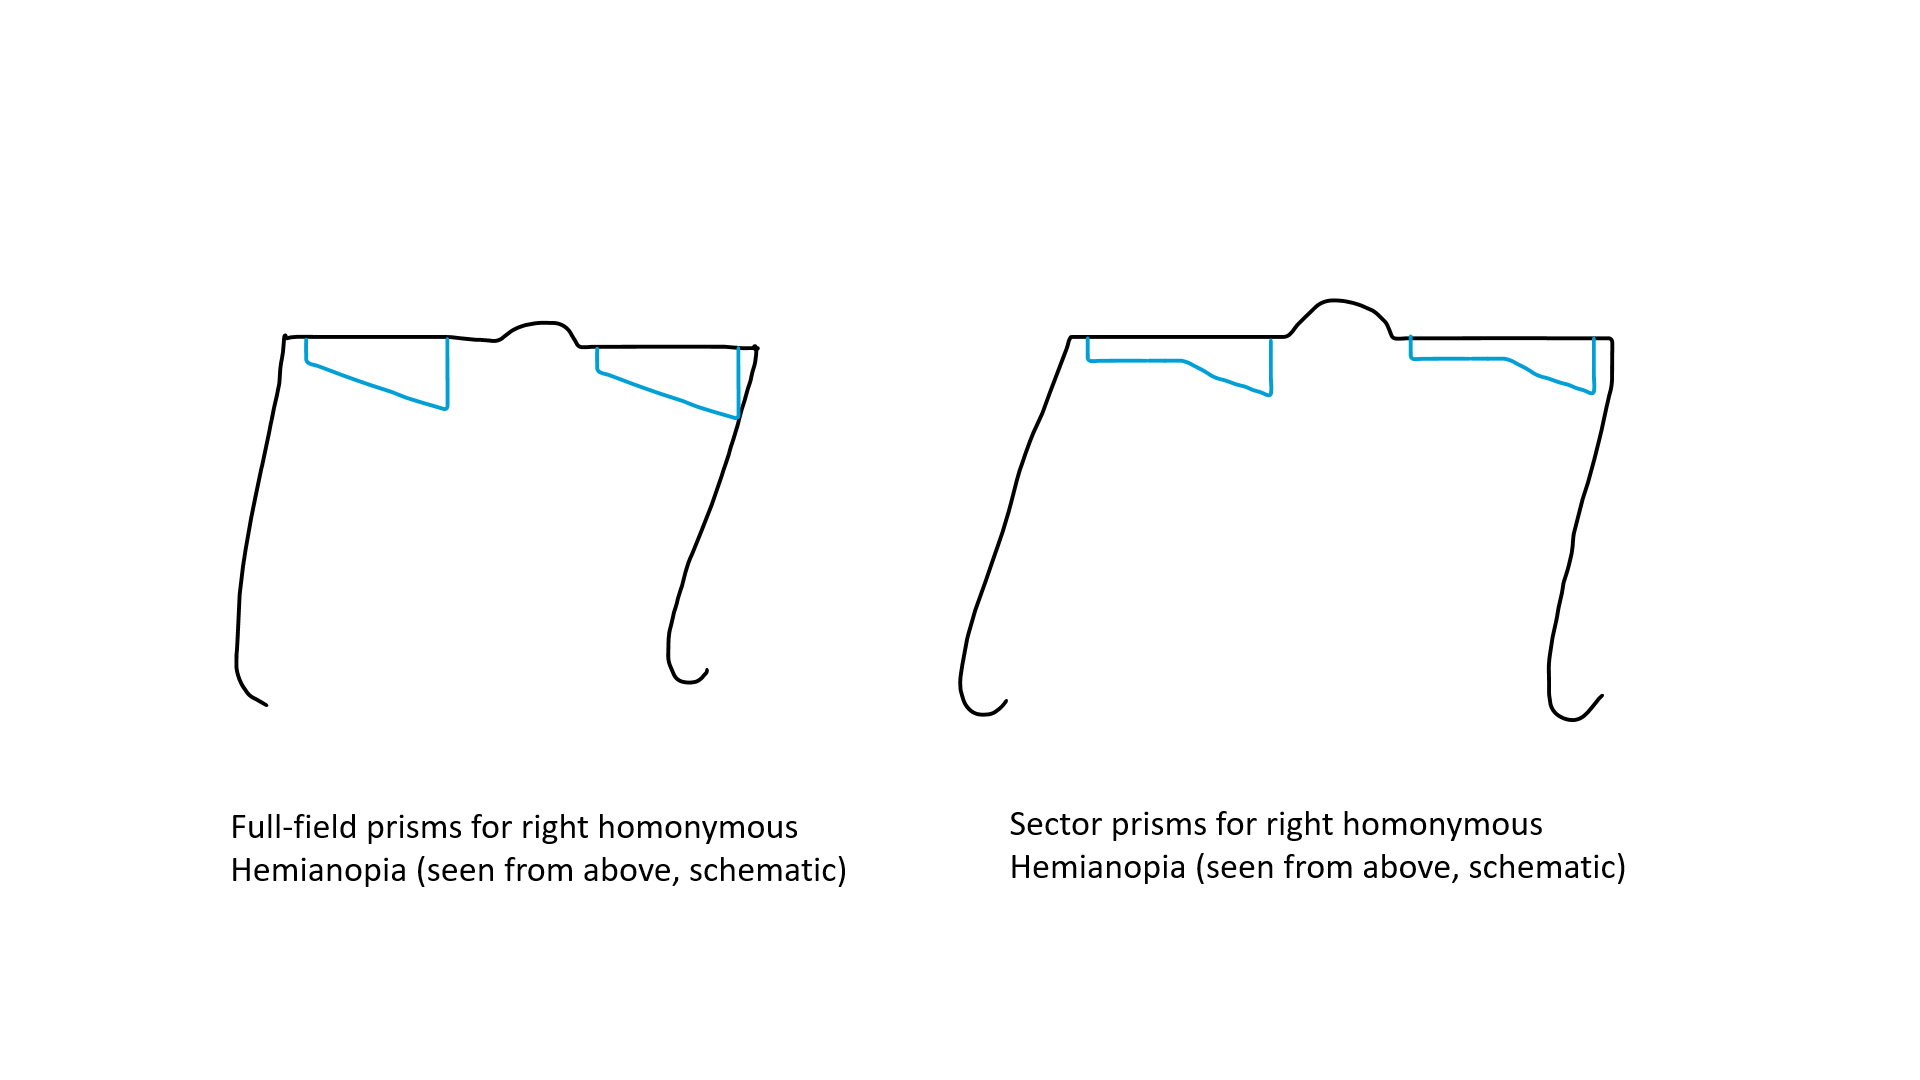 Yoked prisms (Full-field and sector) used in homonymous hemianopia (schematic)